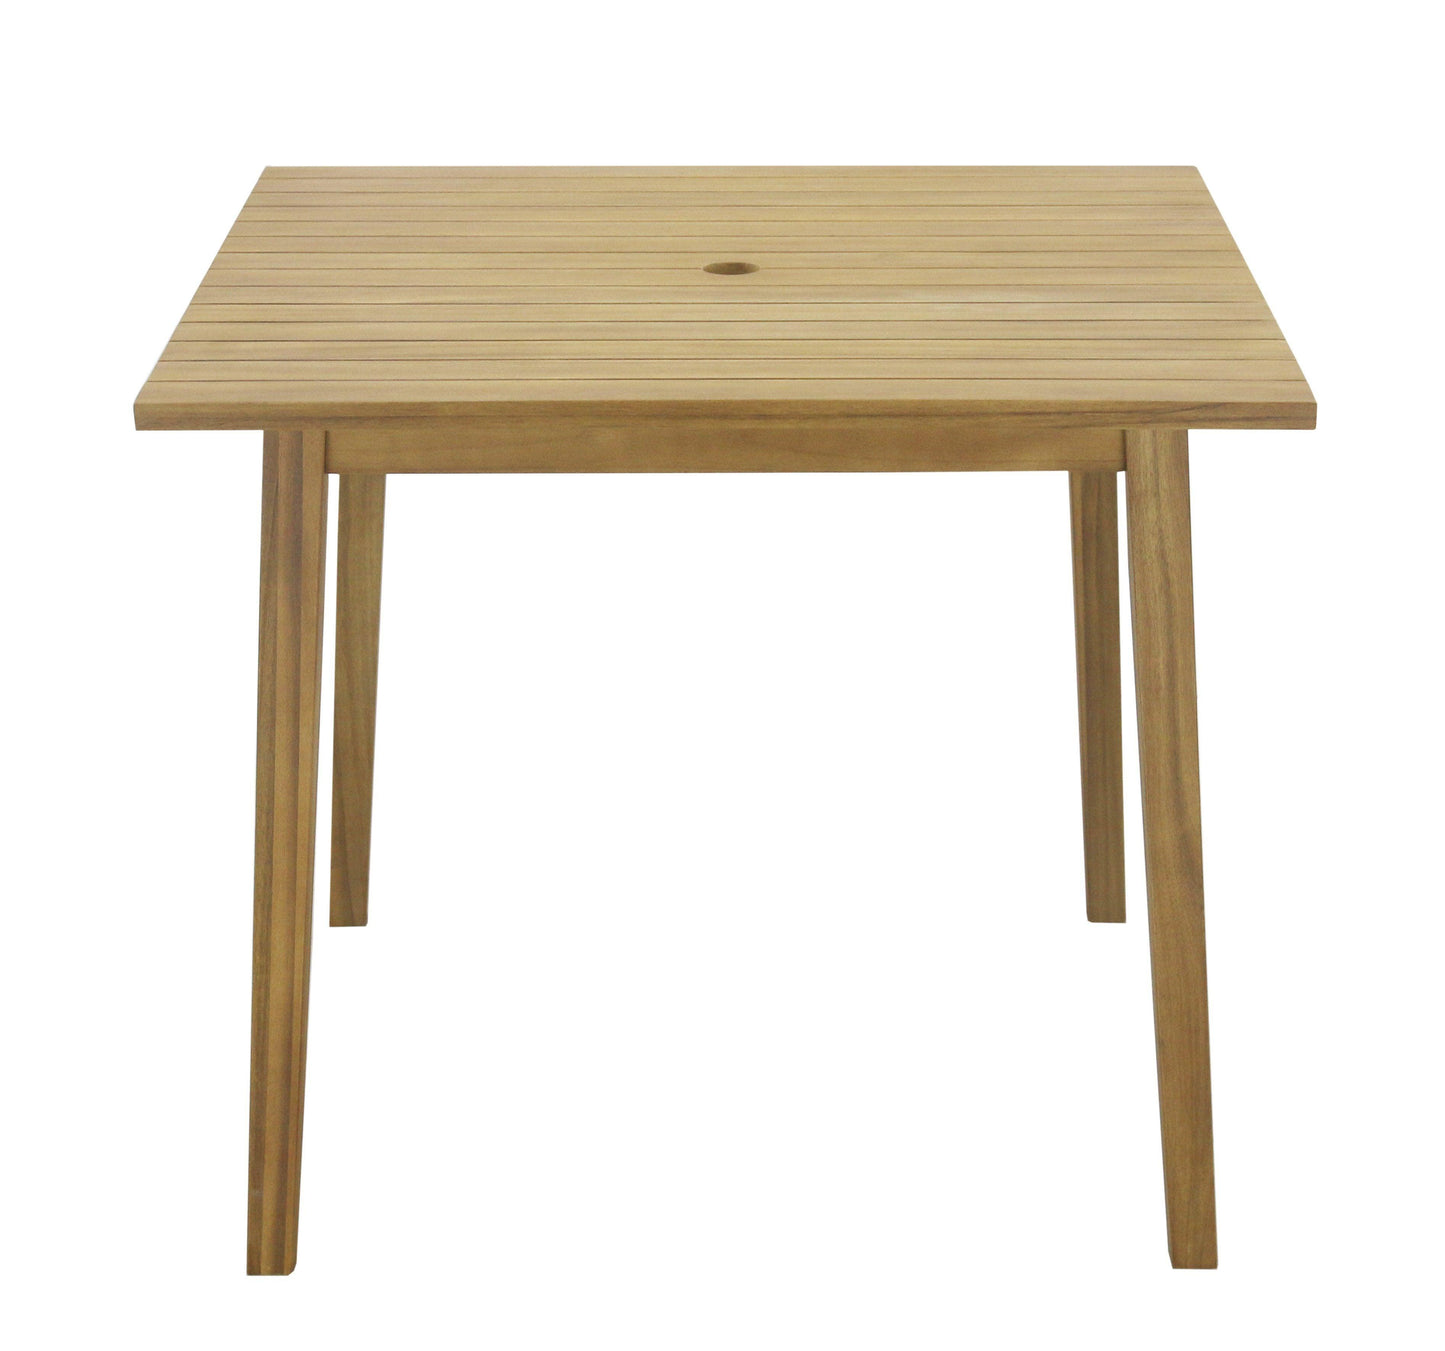 Ackley garden dining table - 4 seater - solid acacia wood - Laura James